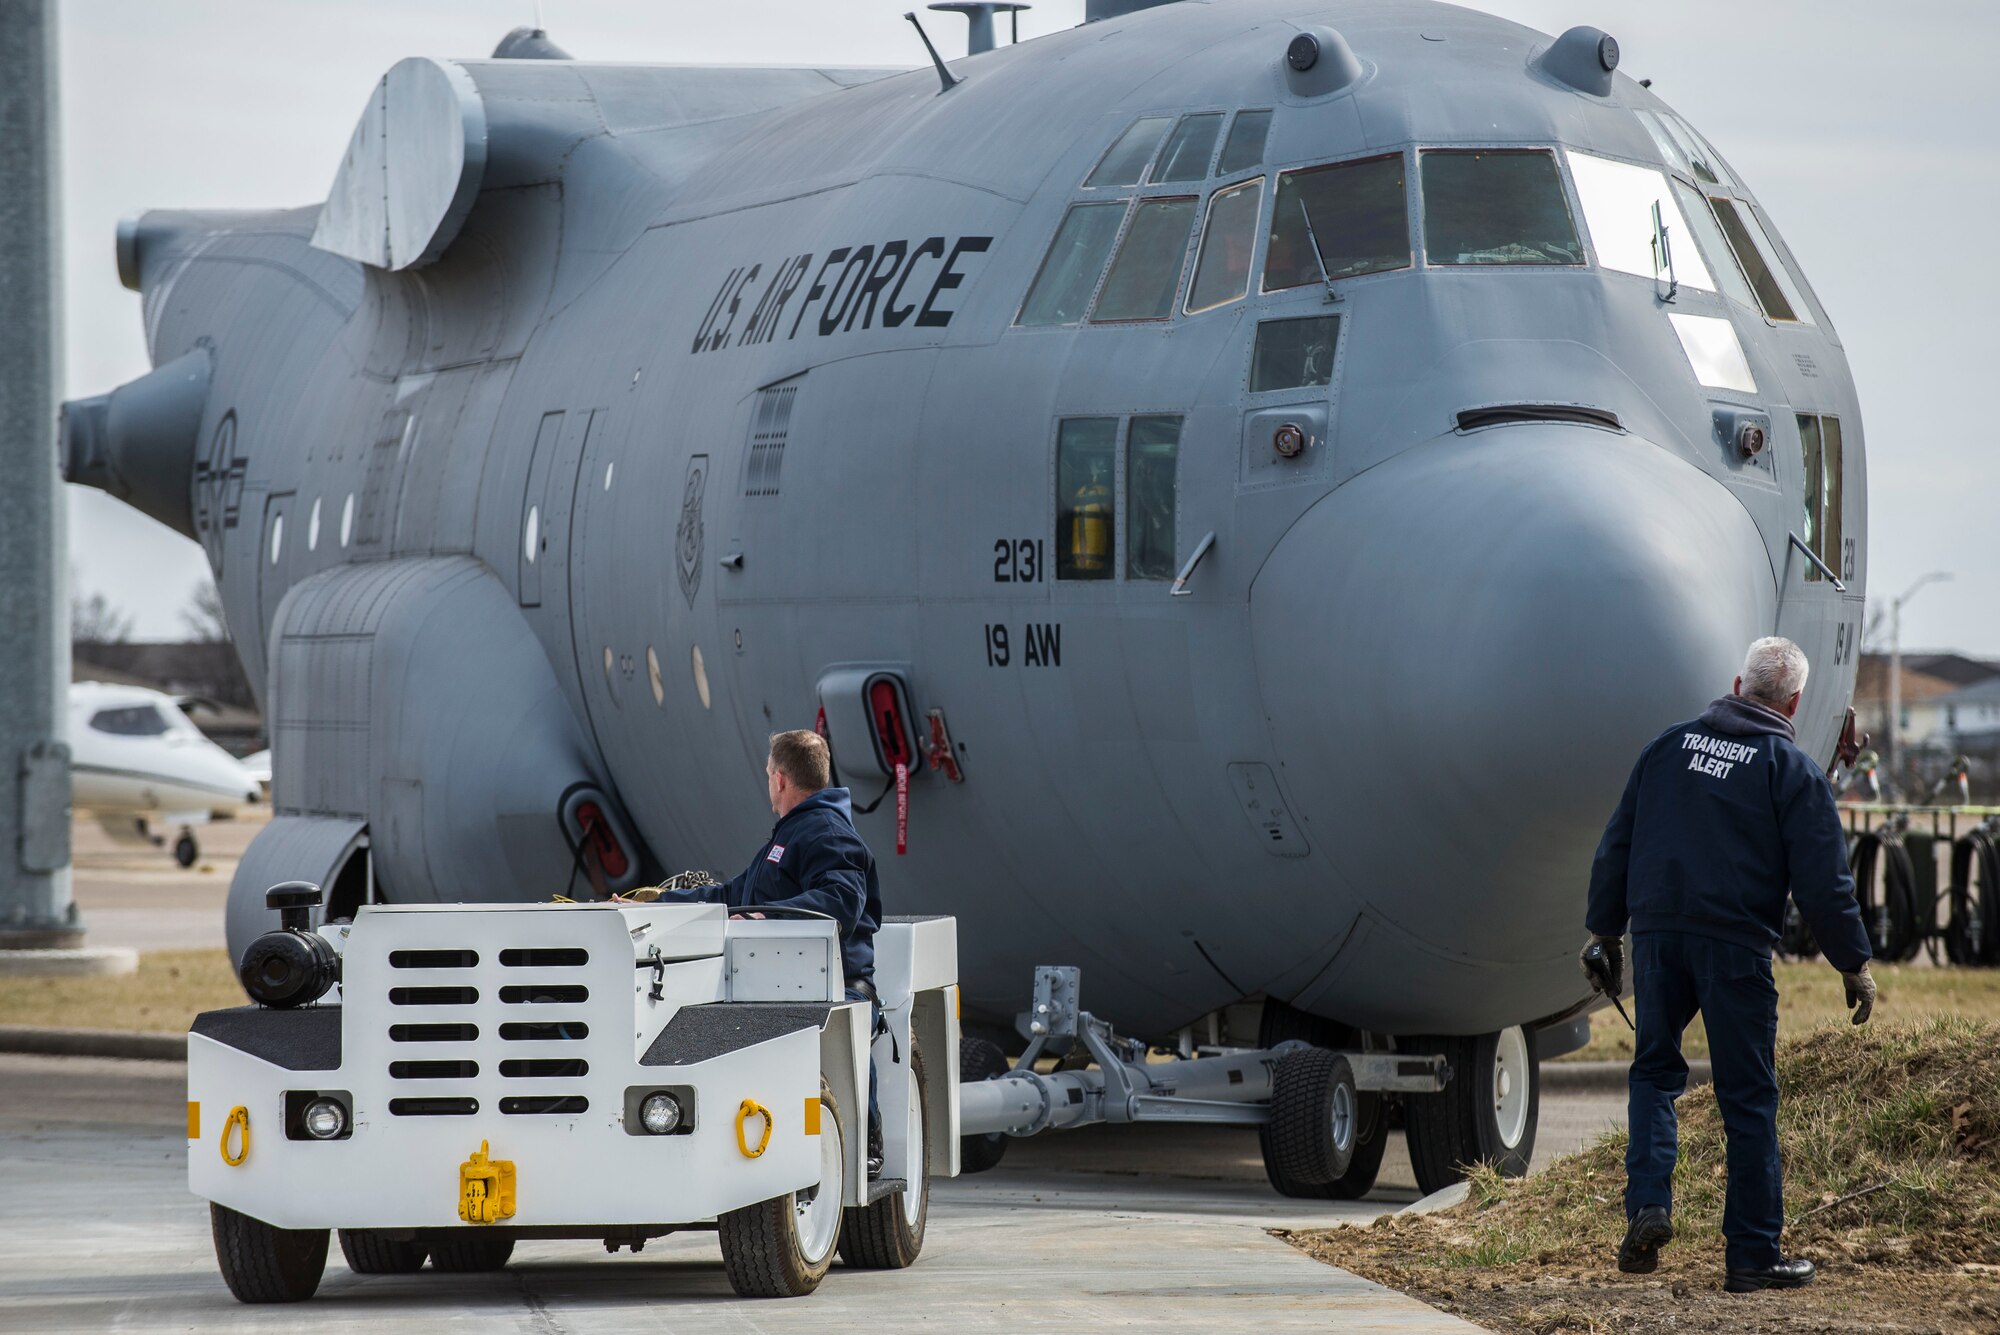 Contractors work with the 375th Aeromedical Evacuation Squadron to help move a C-130 fuselage trainer at Scott Air Force Base, Ill., Feb. 23, 2017. The FuT allows for hands-on muscle memory of configuration, placement of in-flight kits, electrical, oxygen, emergency exits, and various other operations. One hundred percent of readiness skills are completed for the aeromedical evacuation technicians. It helps provide an innovative, cost effective, improved training platform for total force AE crew members and ground support personnel in terms of aircraft configuration familiarization and realistic, high-fidelity task training and mission simulation. (U.S. Air Force photo by Senior Airman Tristin English)